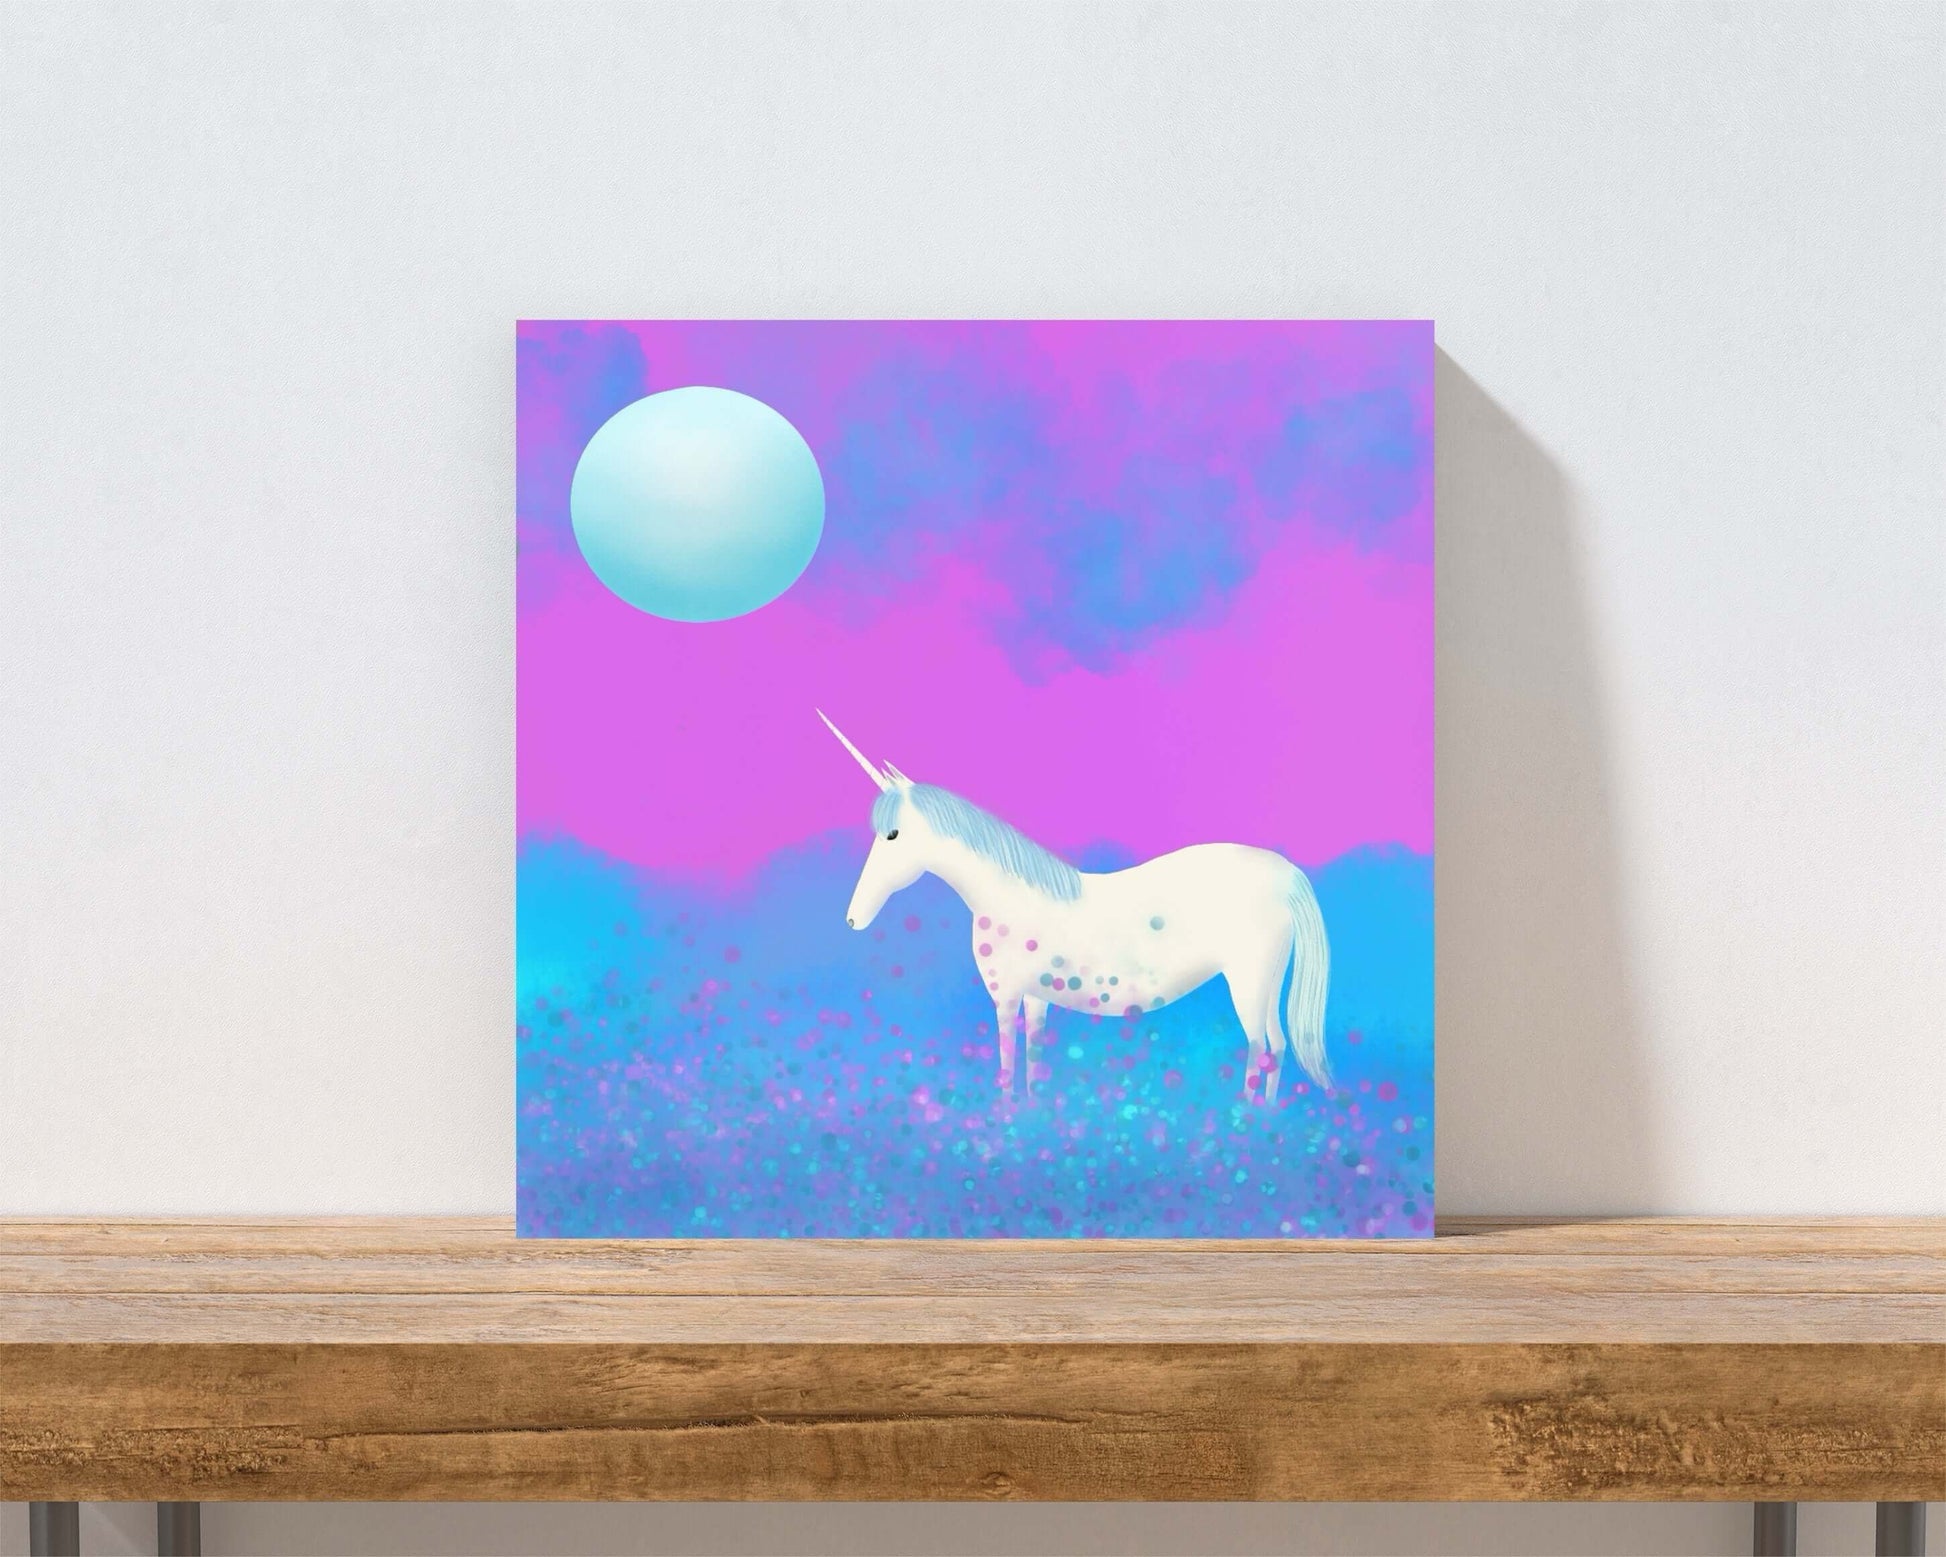 Blue and Purple Unicorn in the Mist with Full Moon “Mystical Unicorn” Canvas Print Wall Art Small Canvas on Wall